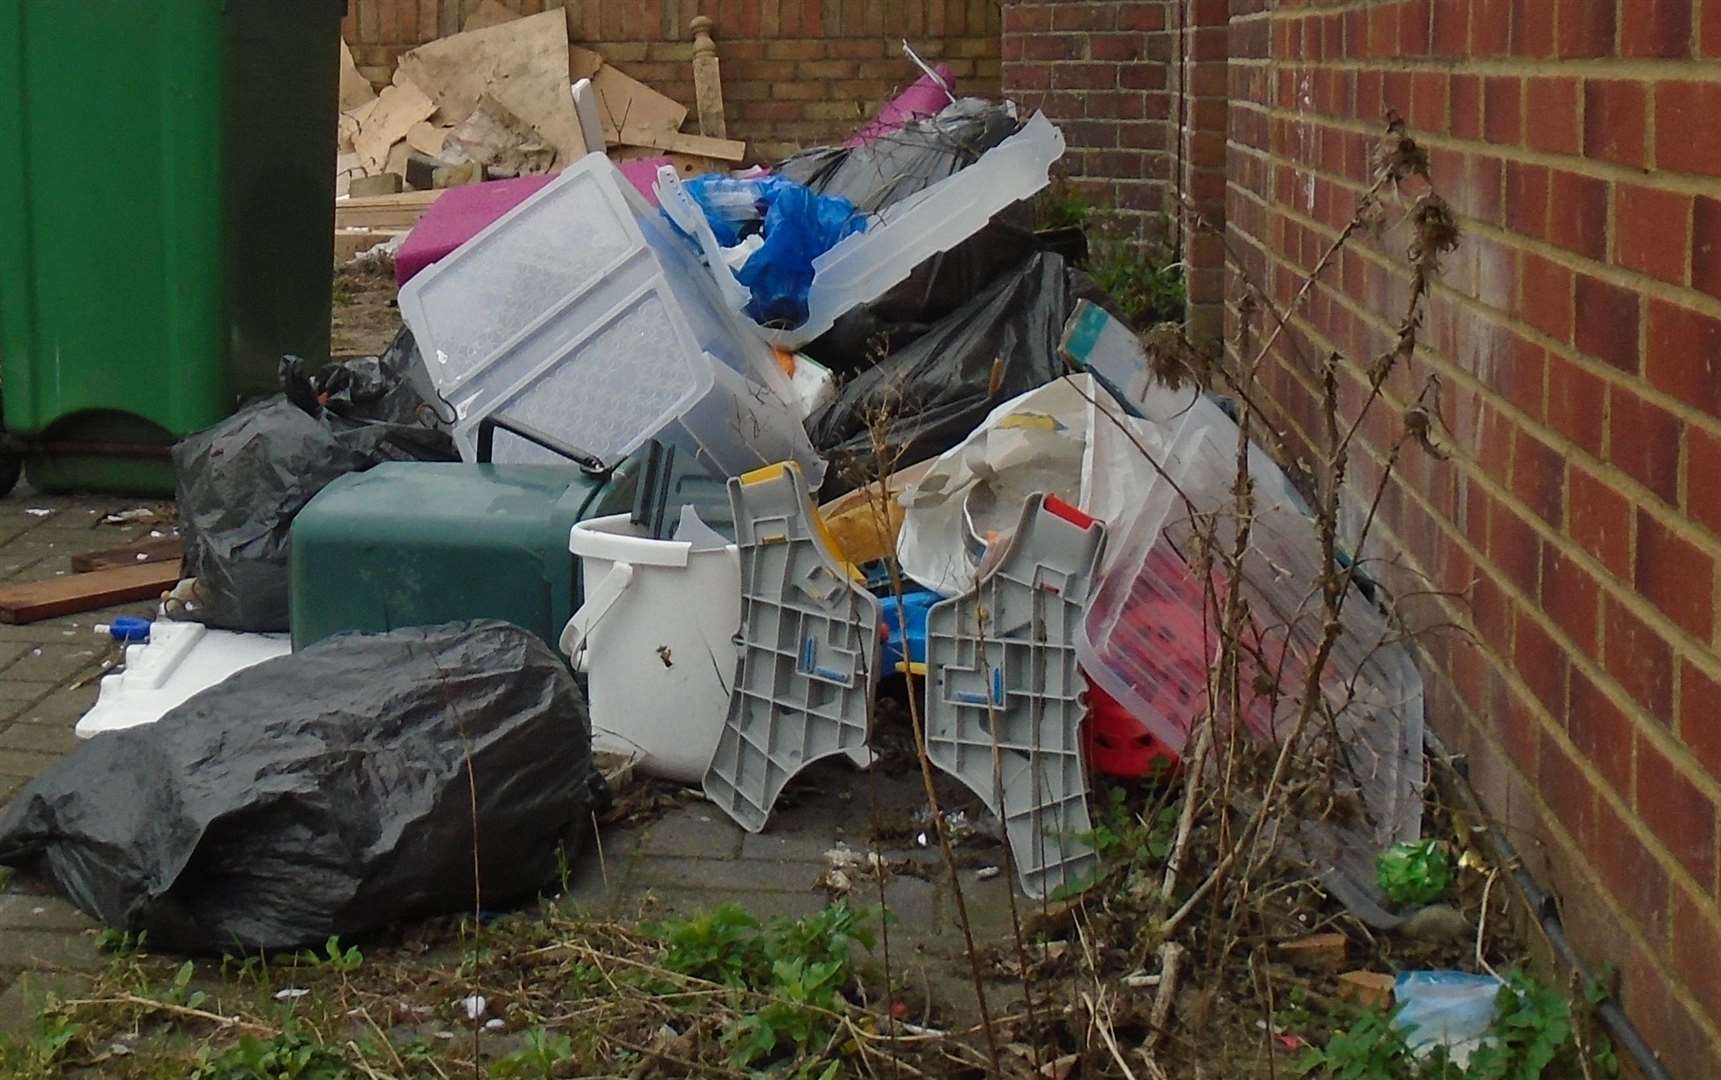 The council was forced to take action after this waste was found in Baldwin Terrace, Folkestone